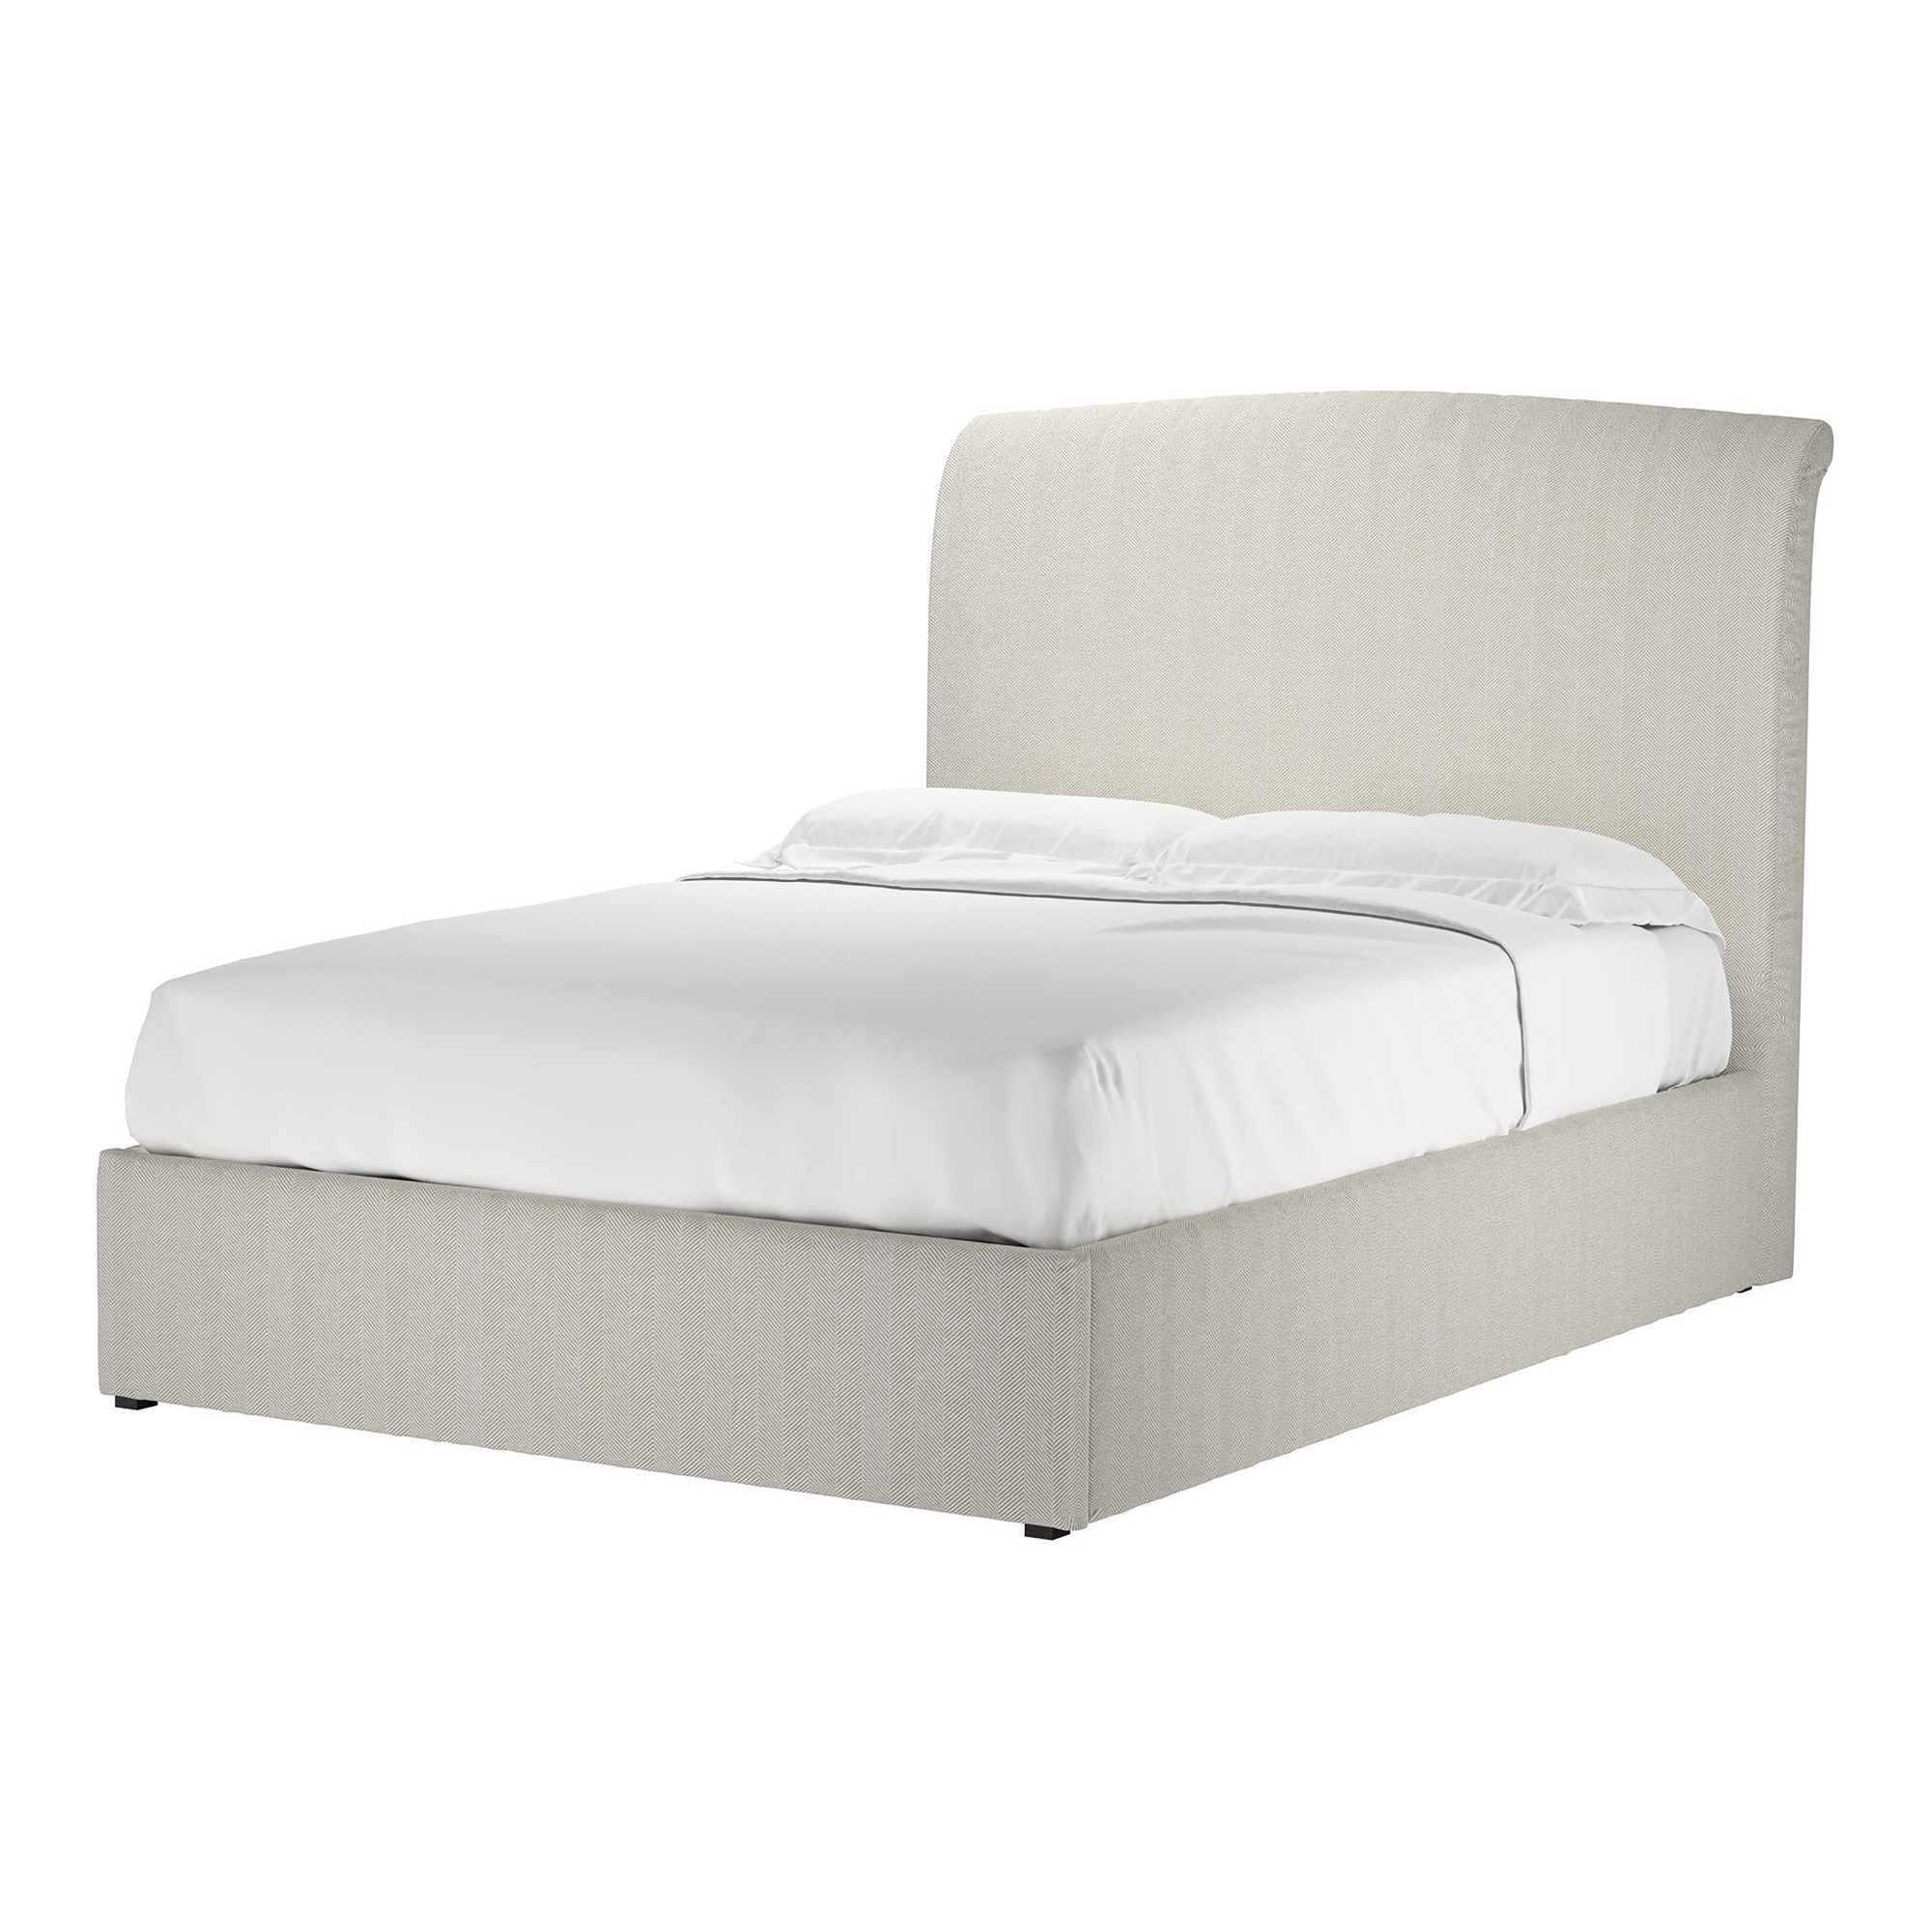 Thea Clay House Herringbone Weave Ottoman Bed - Double Size